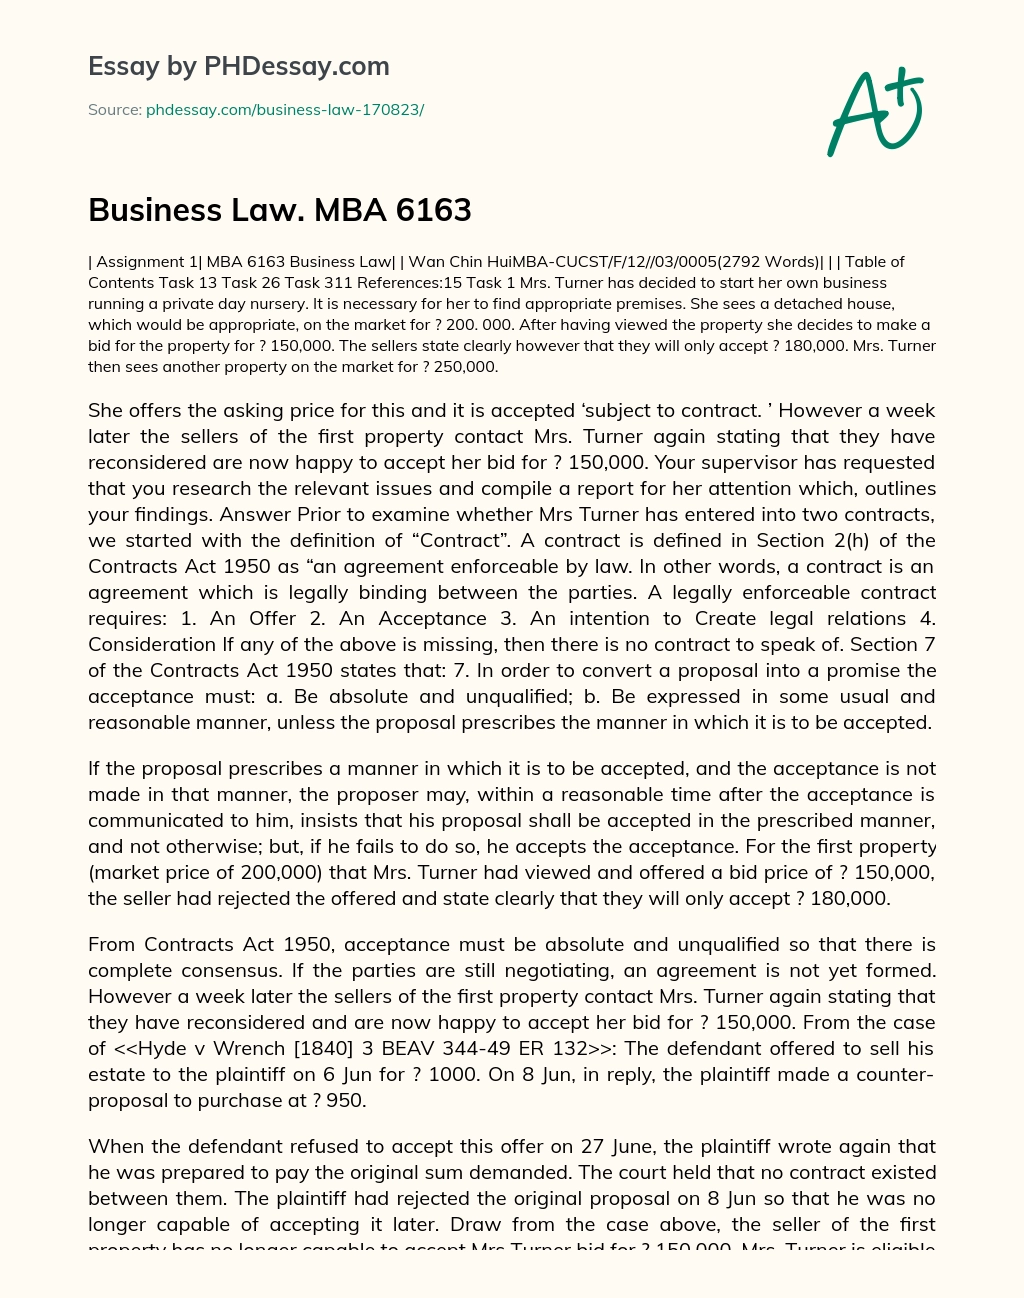 Business Law. MBA 6163 essay